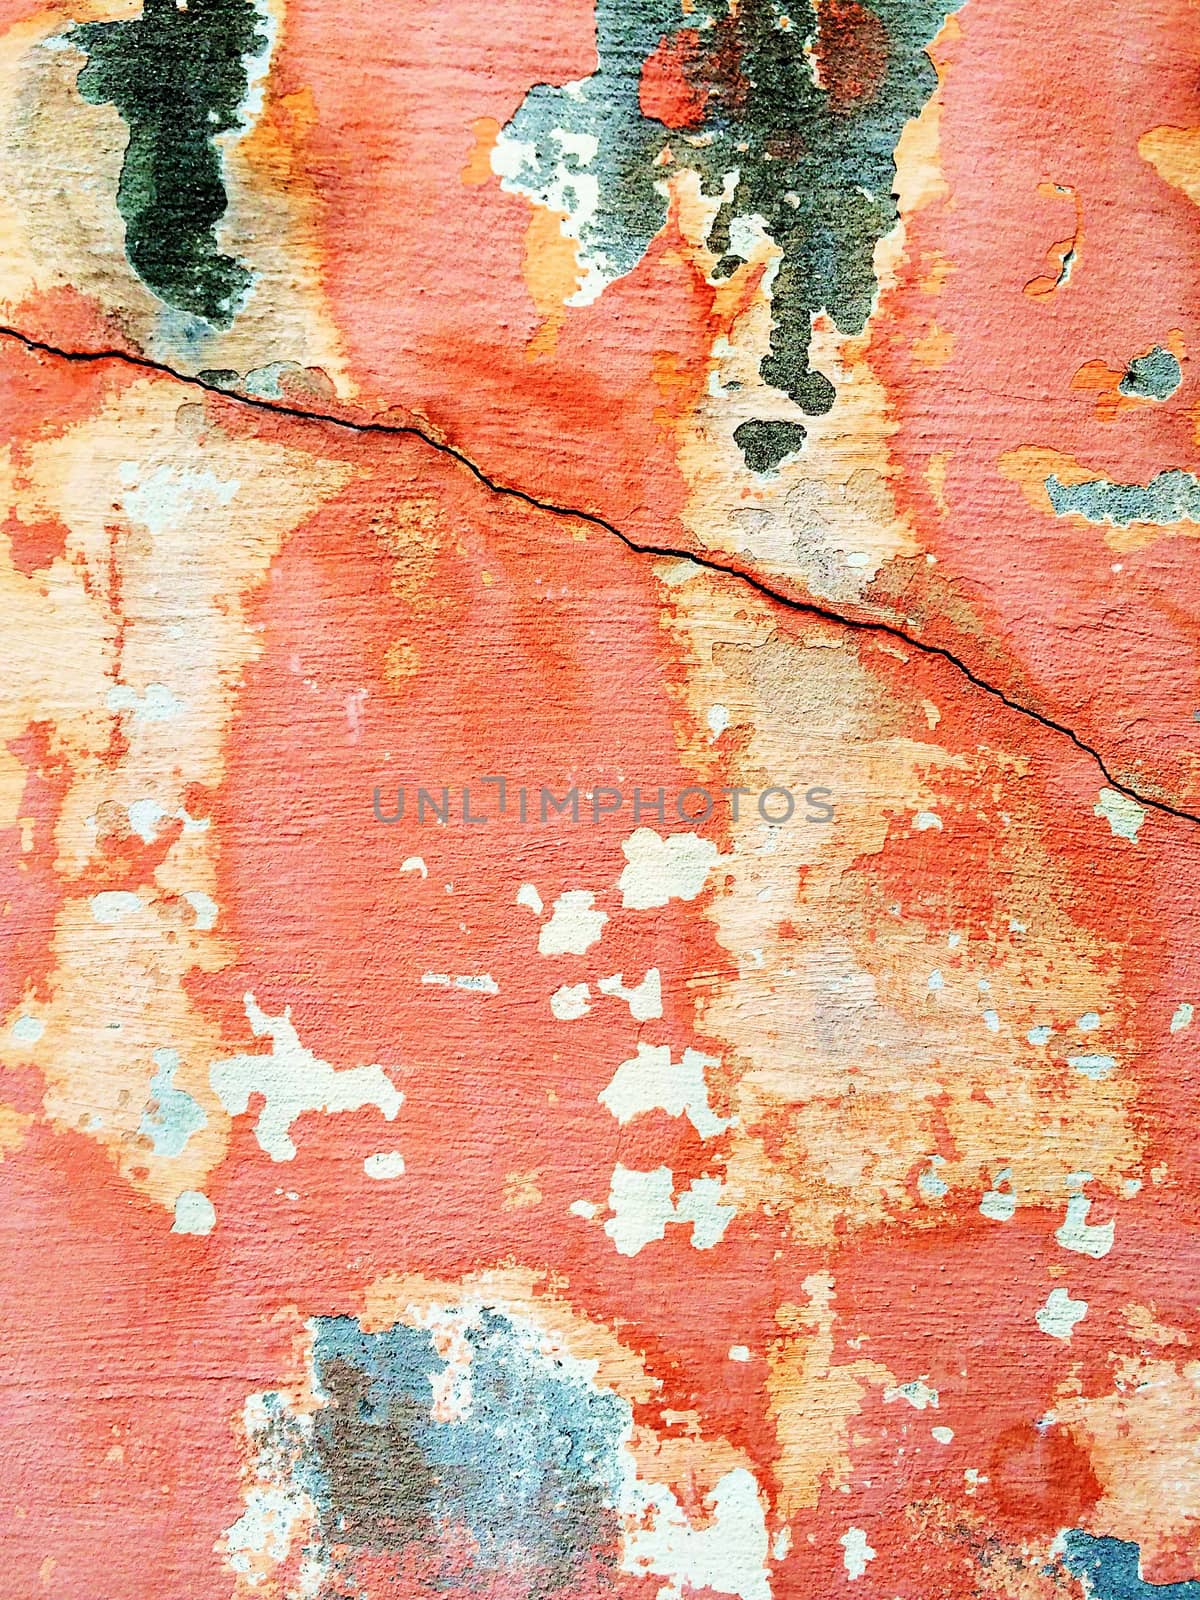 Cracked red wall with peeling paint by anikasalsera